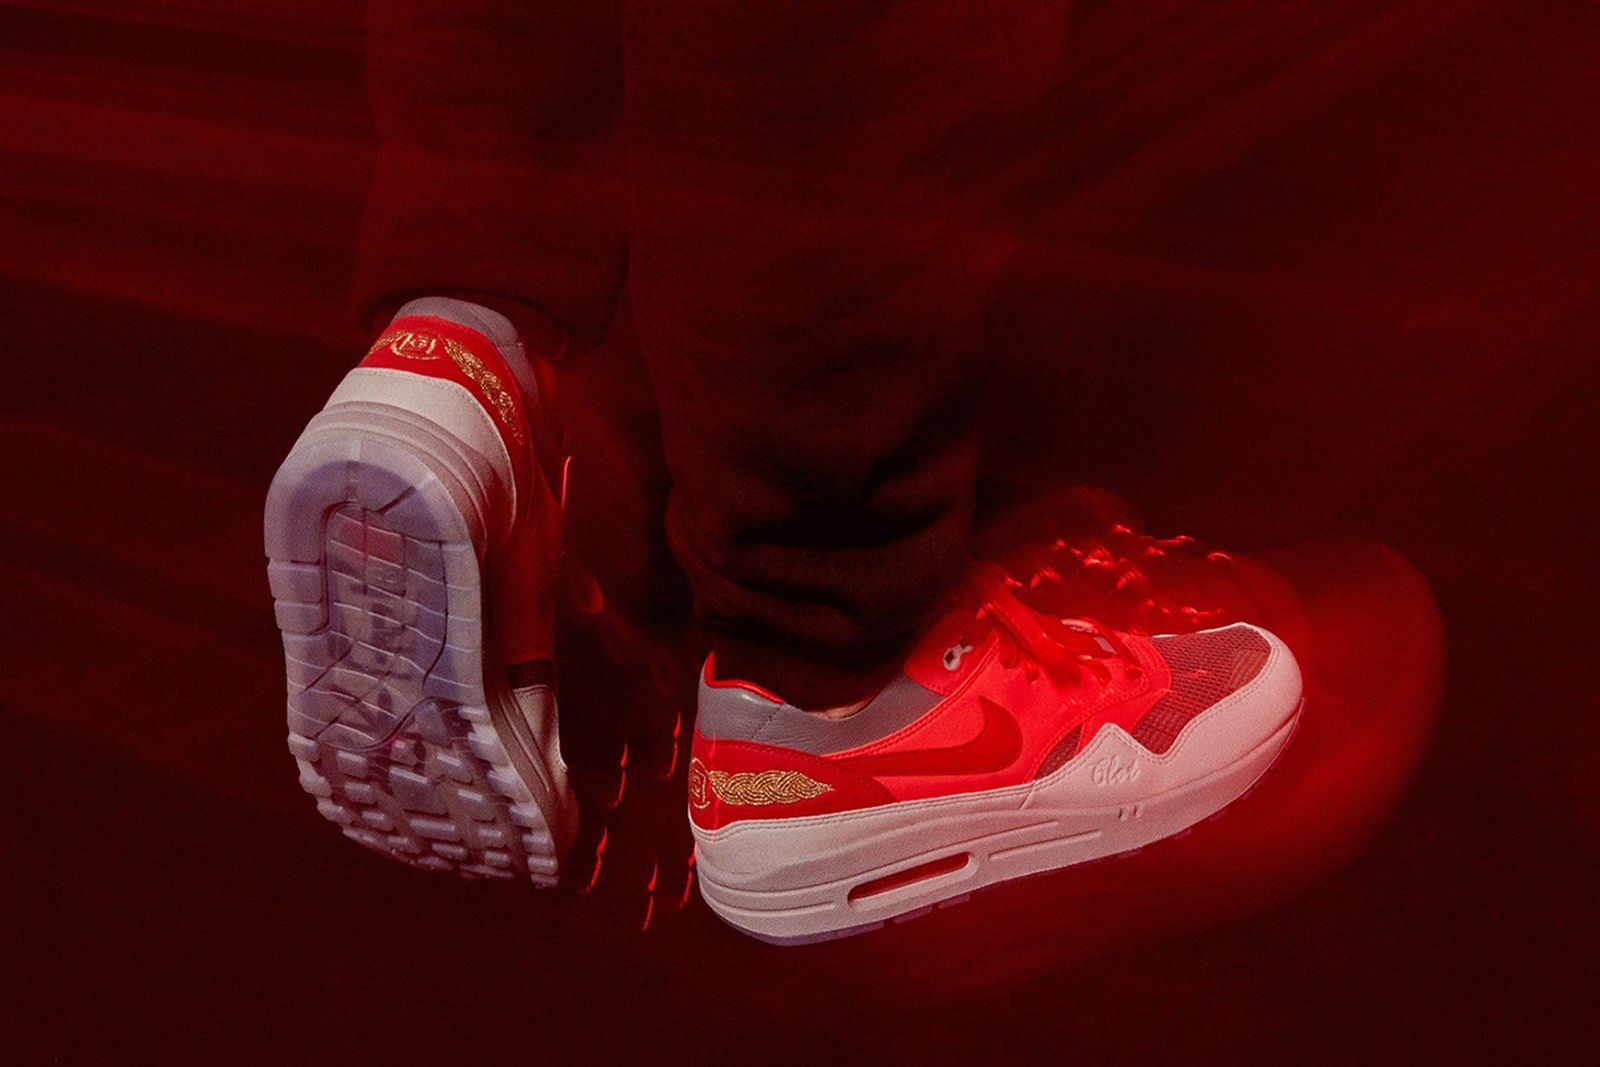 clot-nike-air-max-1-kod-solar-red-release-date-price-02